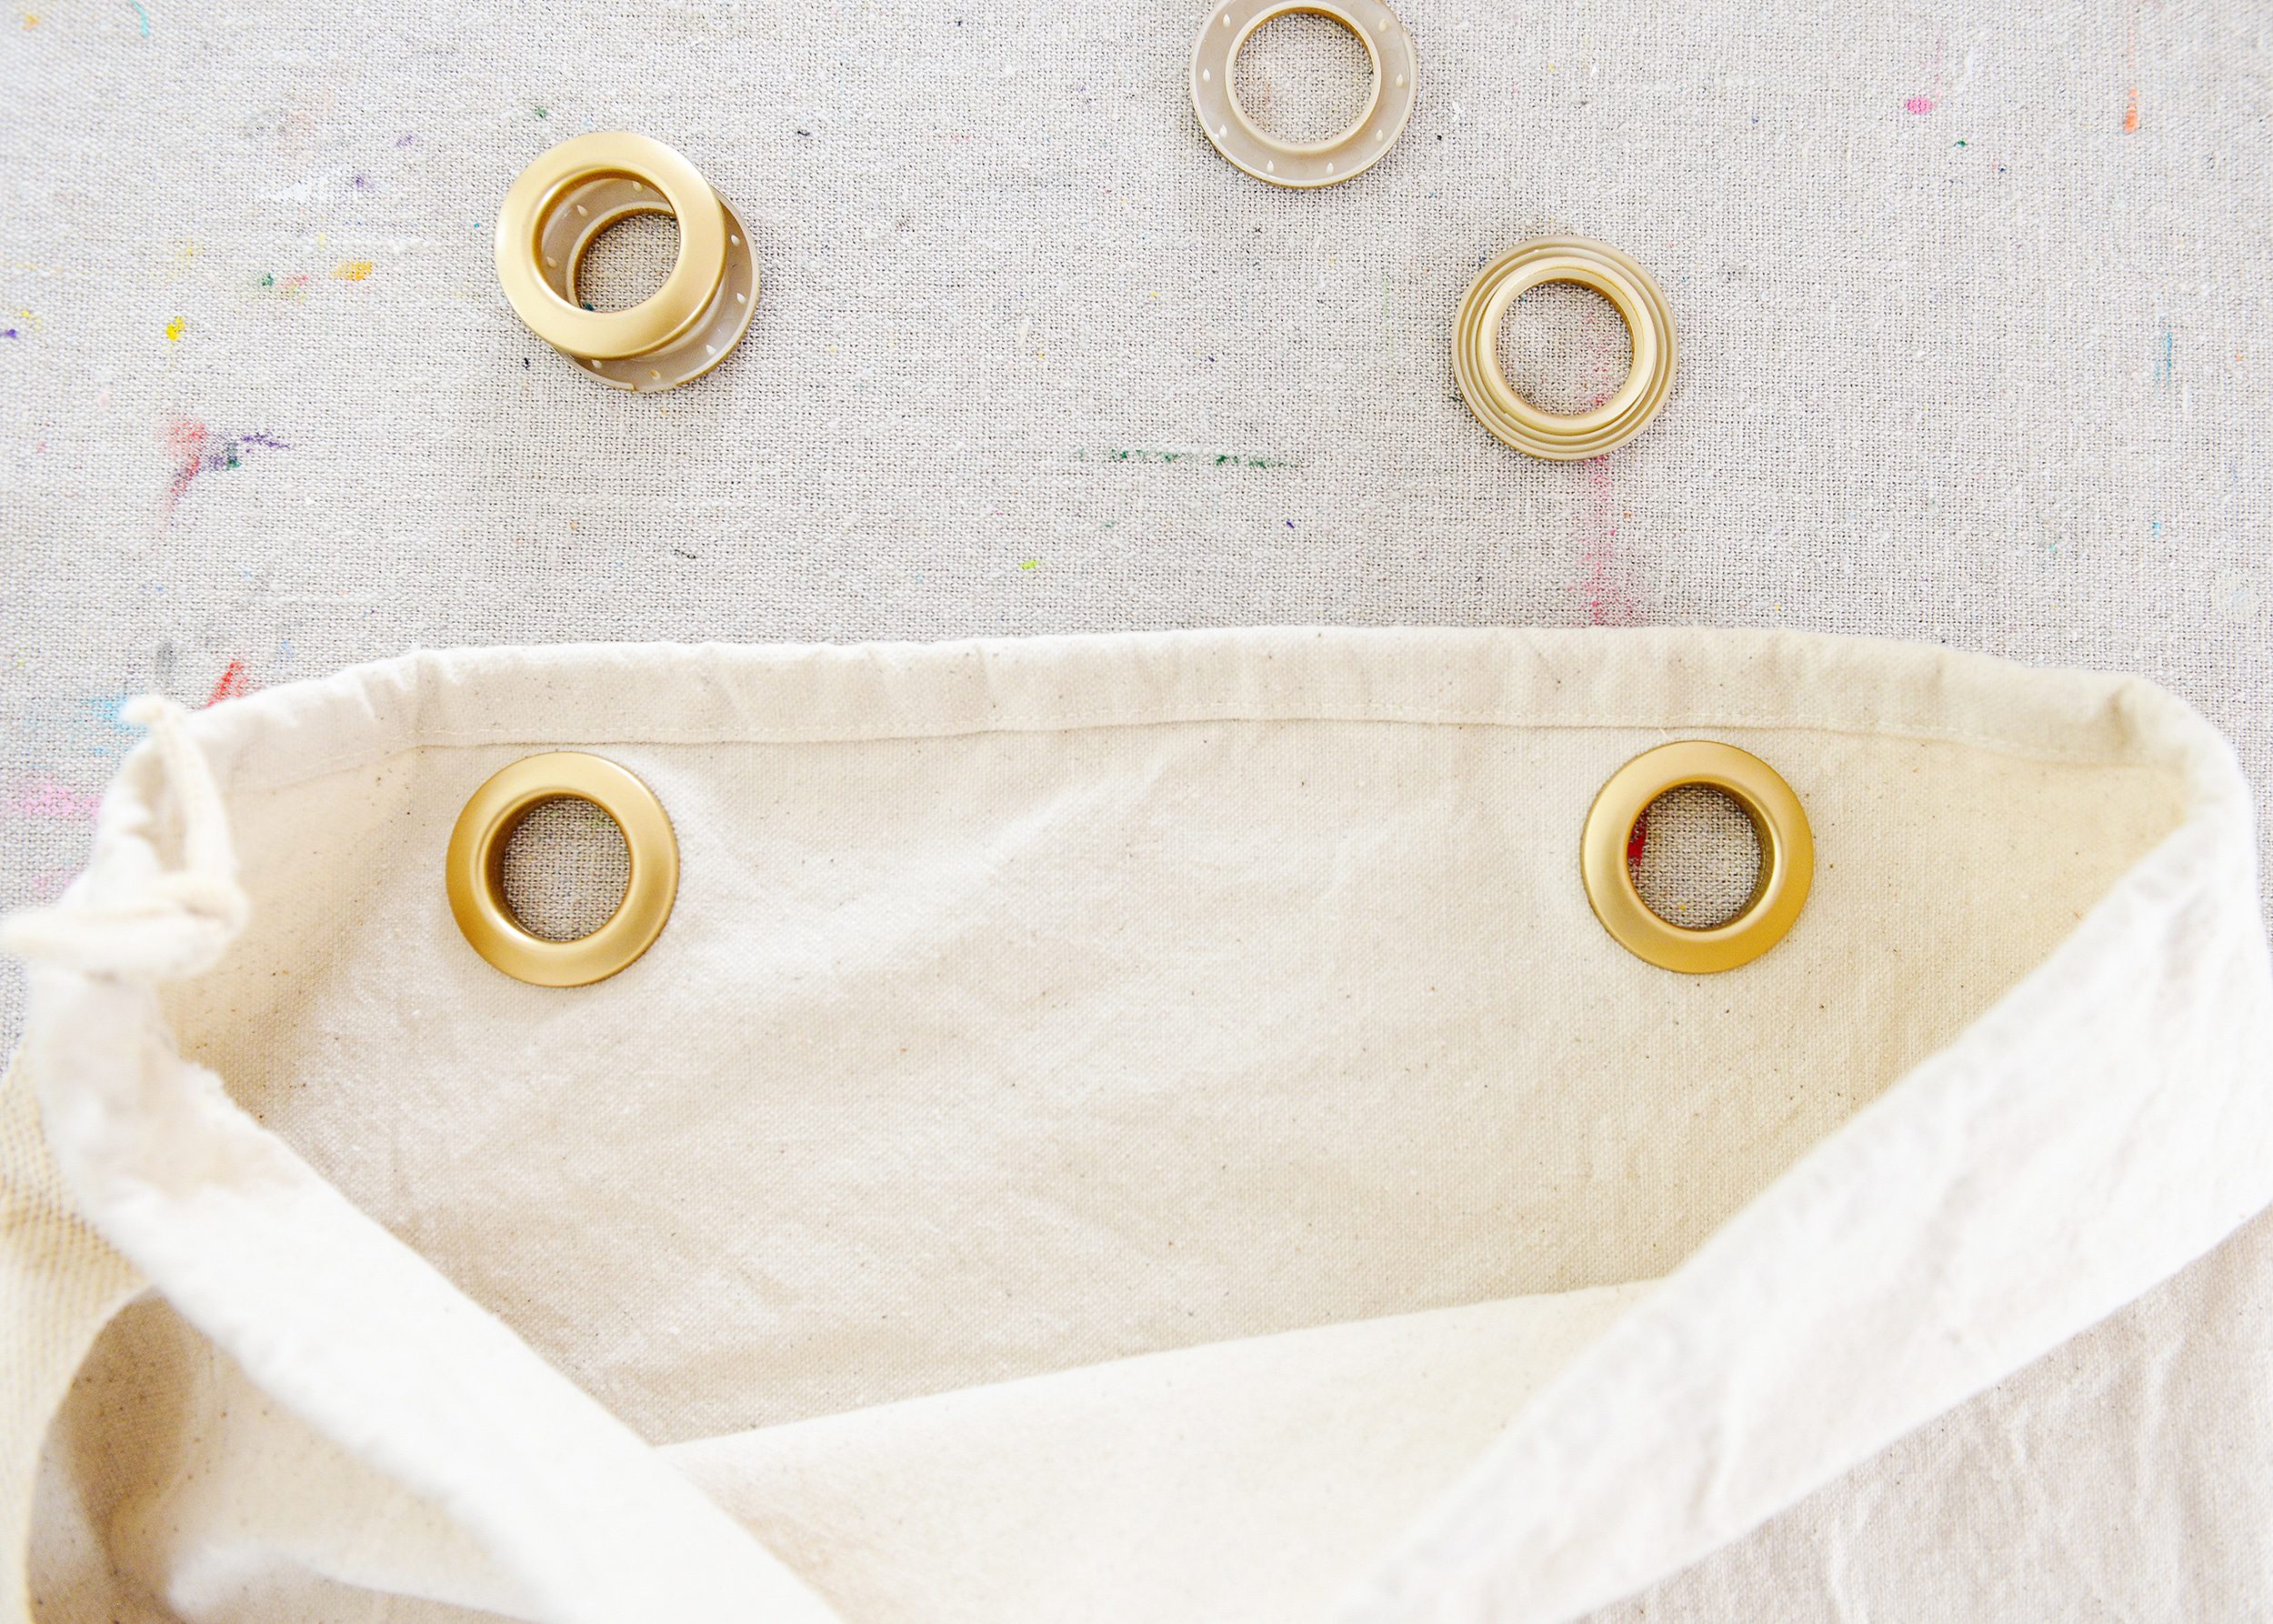 Adding the grommets to the laundry bags | A DIY Laundry Sorter Solution, via Yellow Brick Home